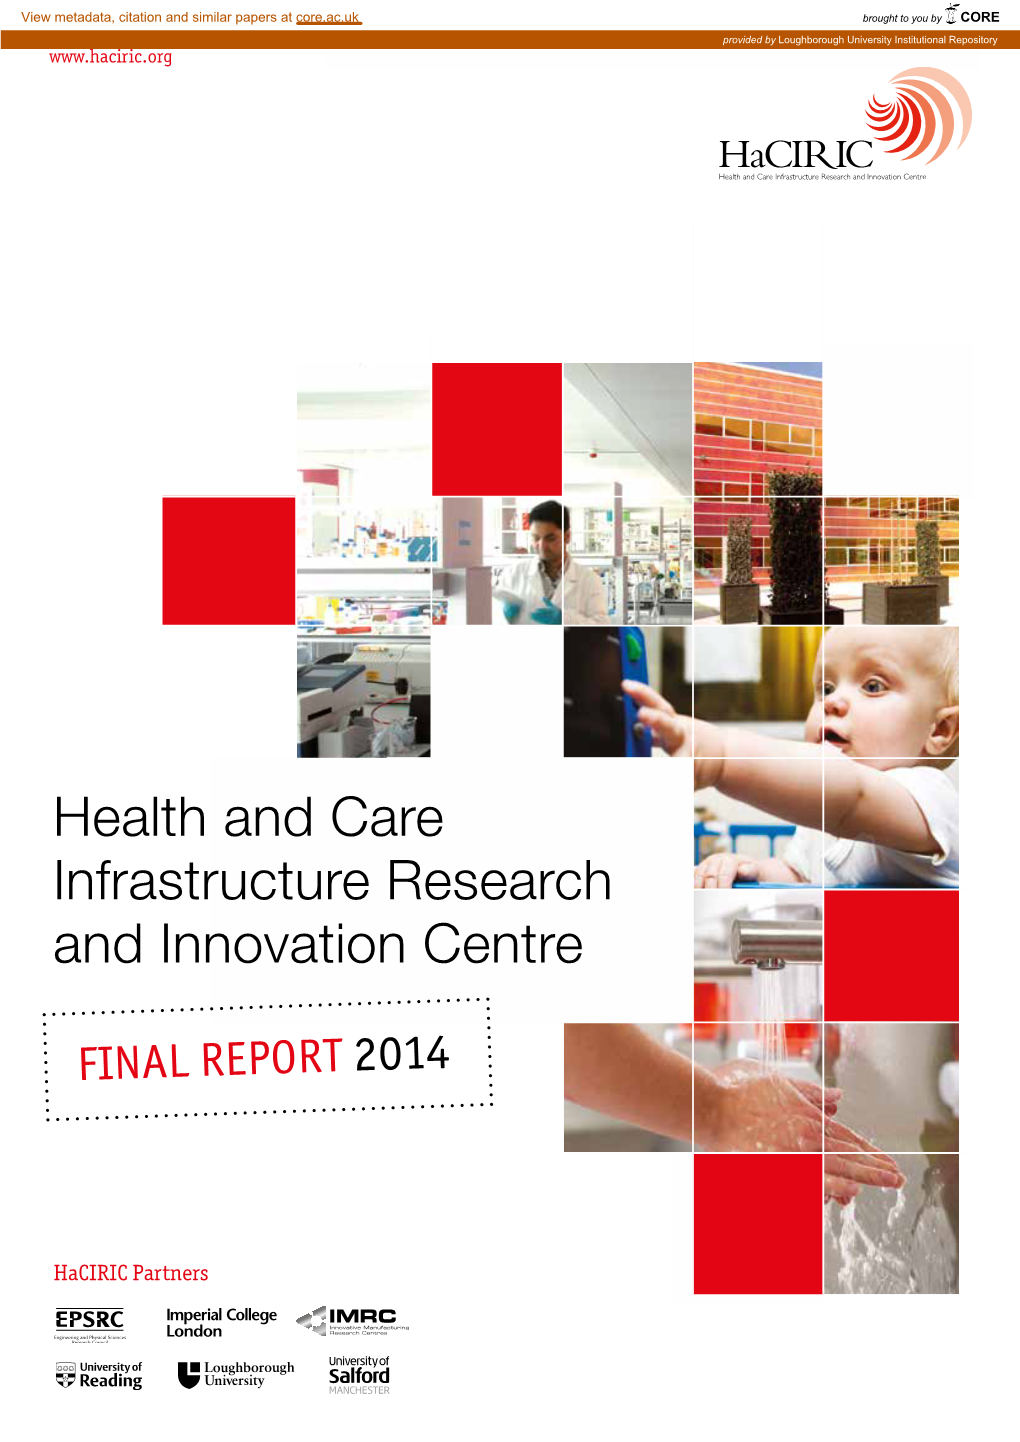 Health and Care Infrastructure Research and Innovation Centre